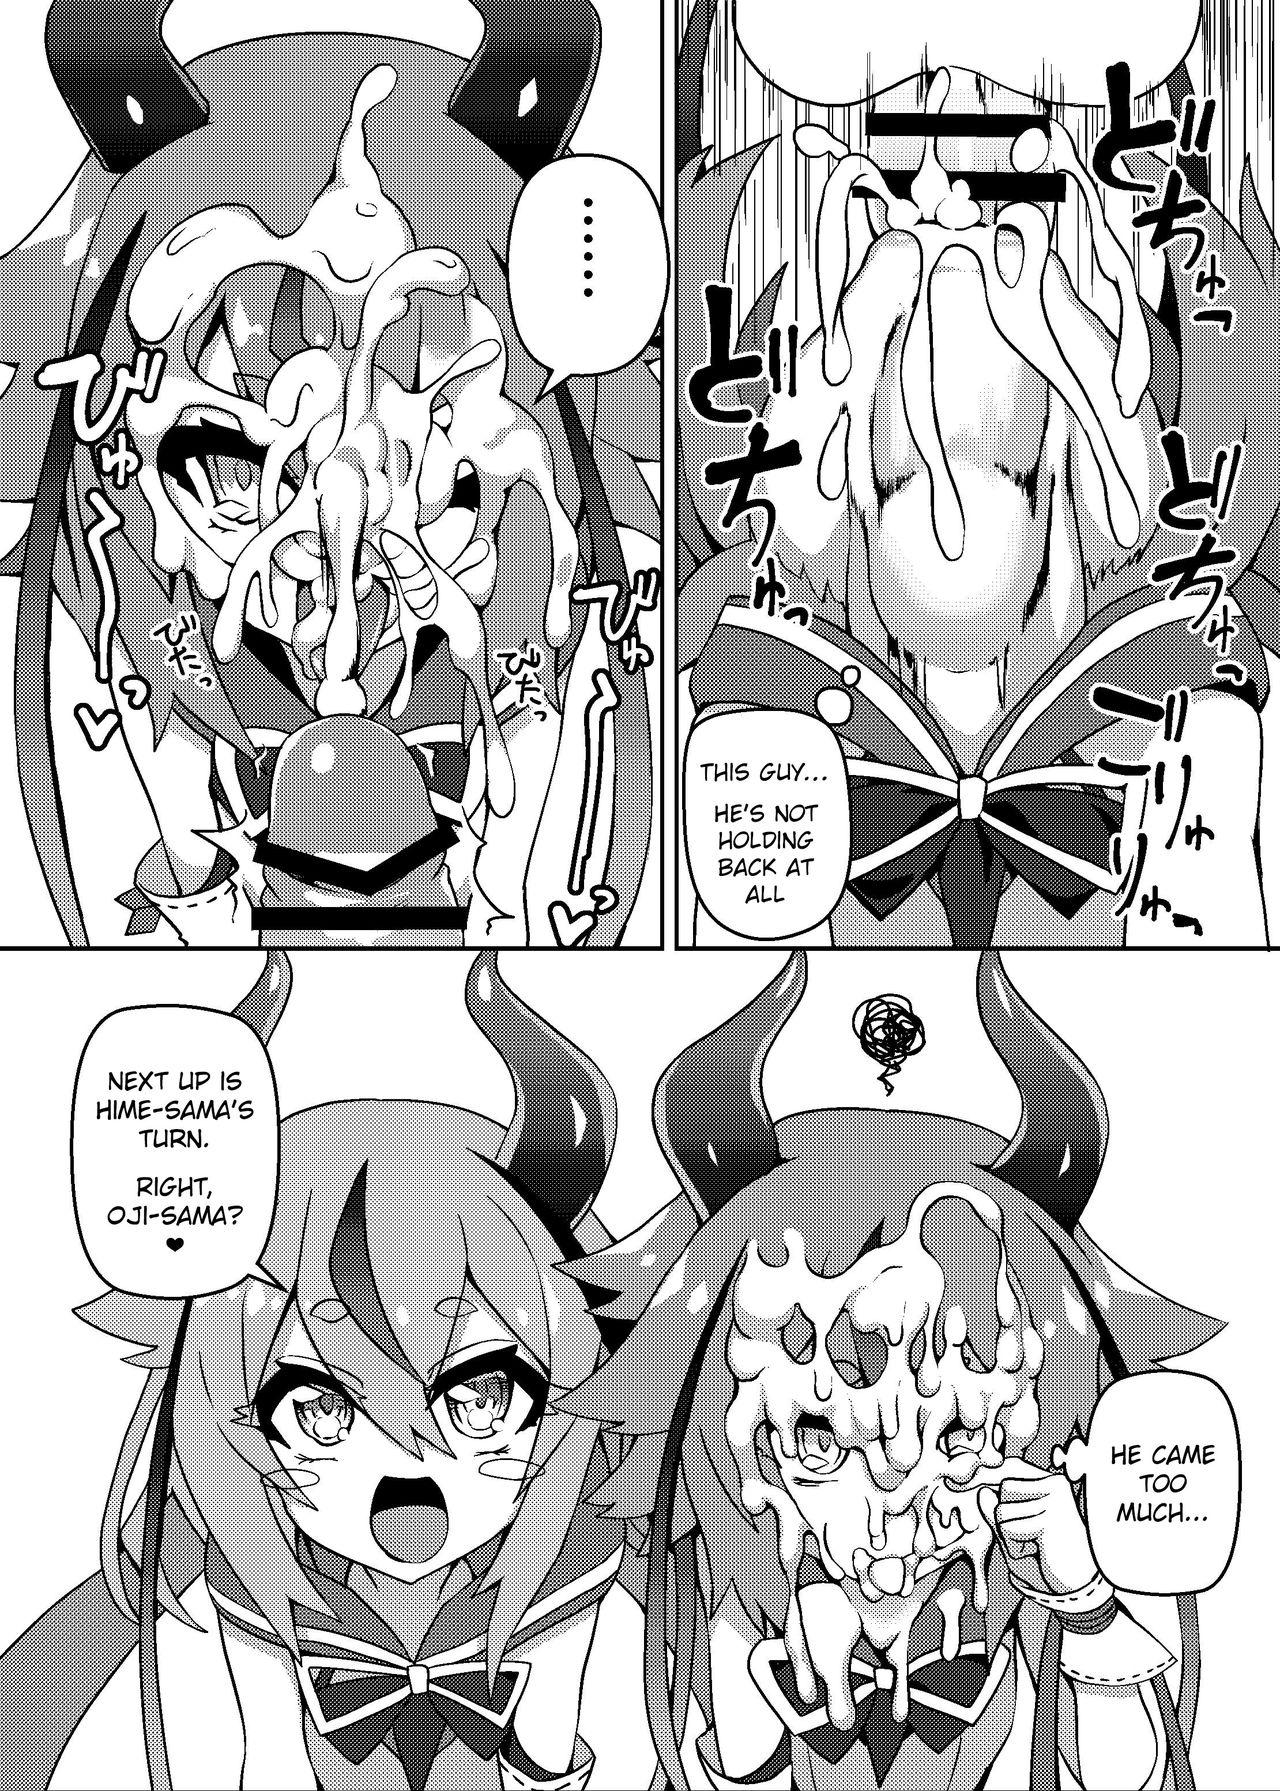 Coroa Talk Character Okuchi Only Book - Vocaloid Voiceroid Cheating Wife - Page 3